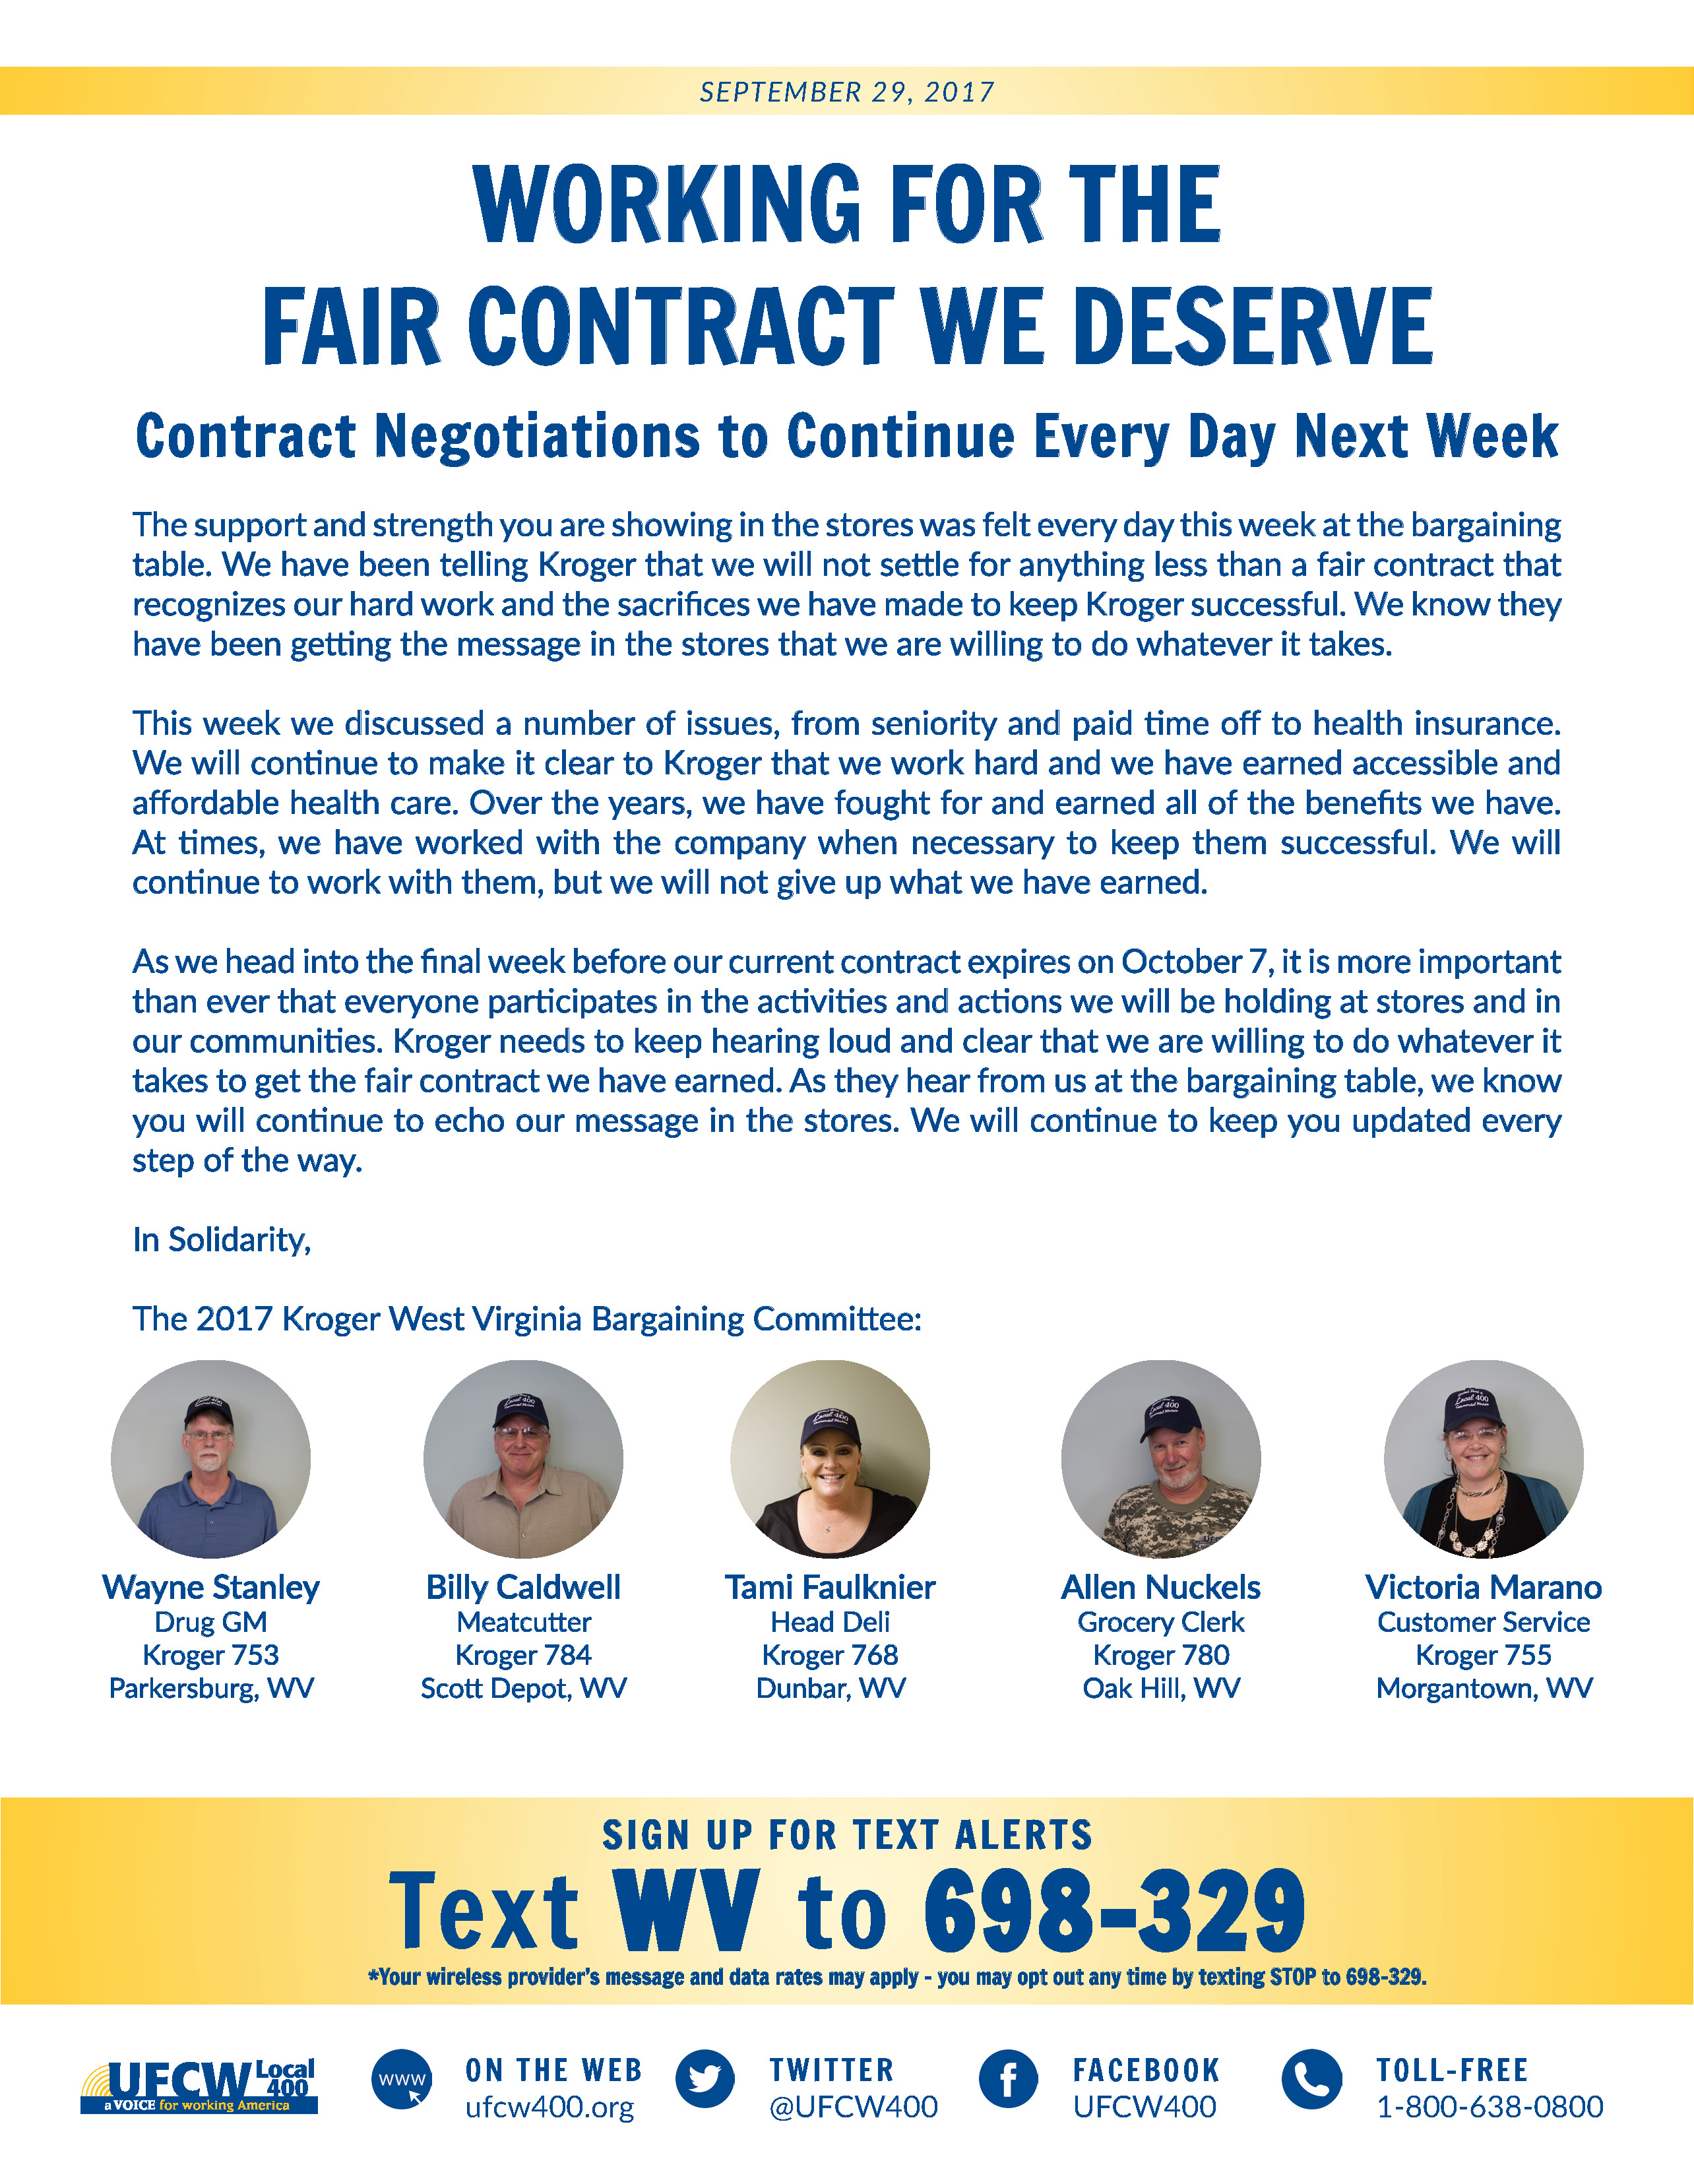 Working for the Fair Contract We Deserve